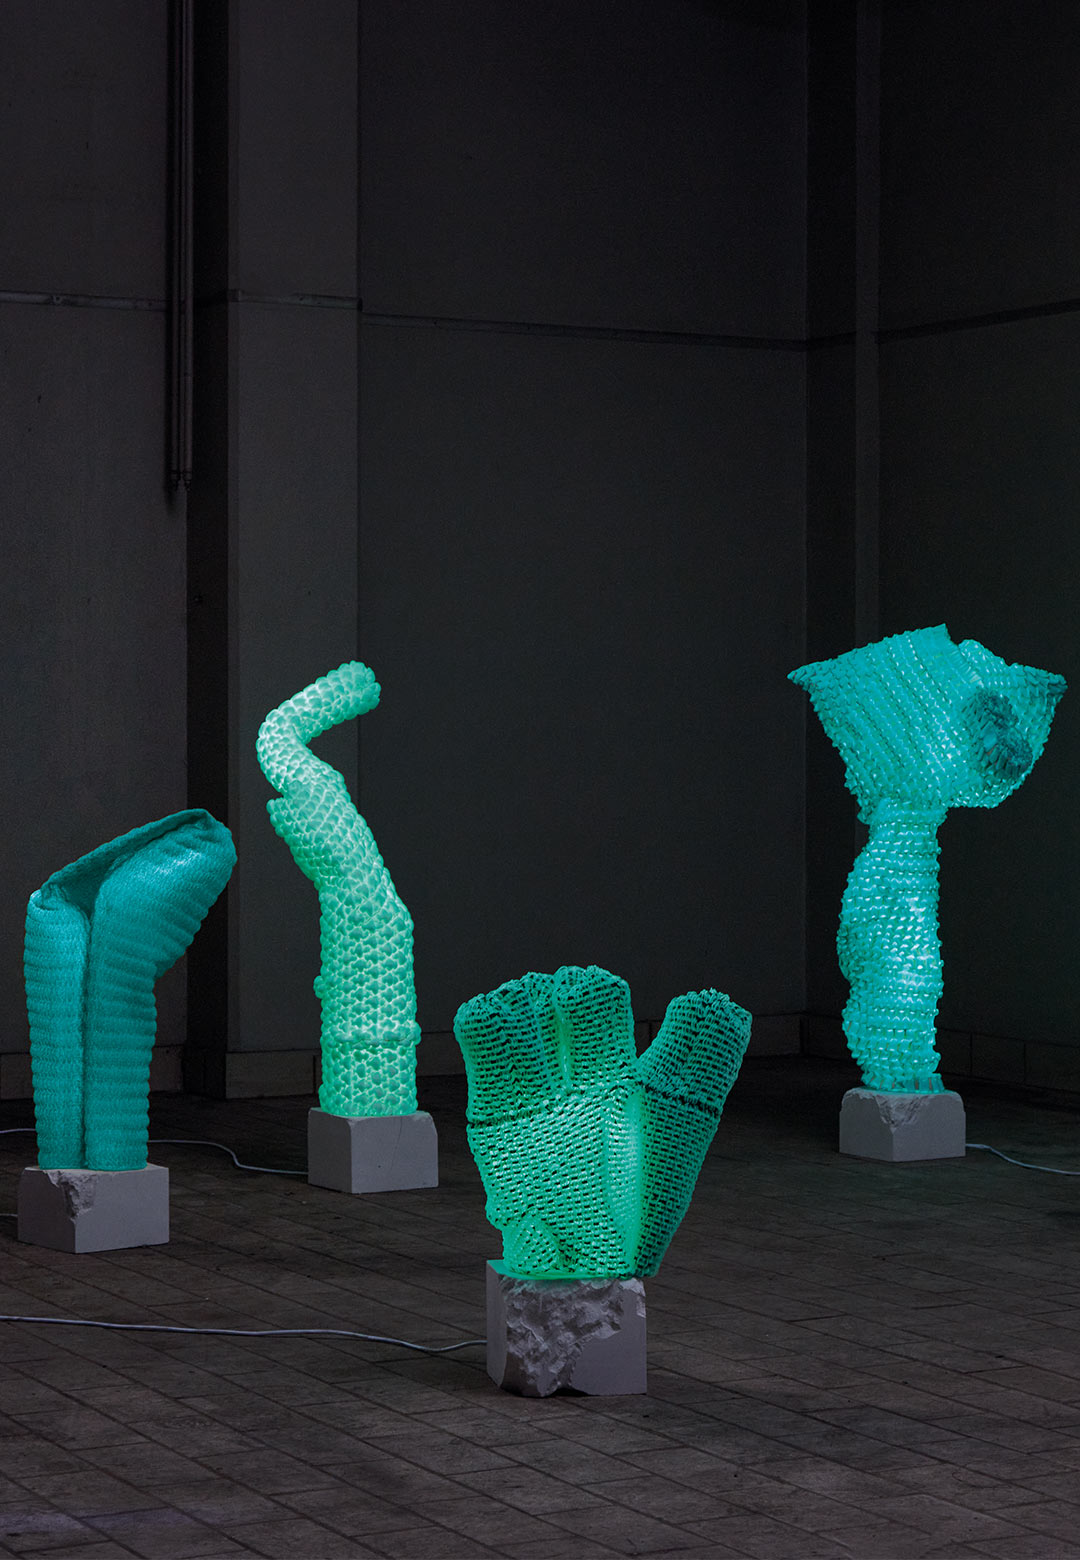 Sangmin Oh’s ‘Knitted Light’ collection evokes images of vibrant underwater corals